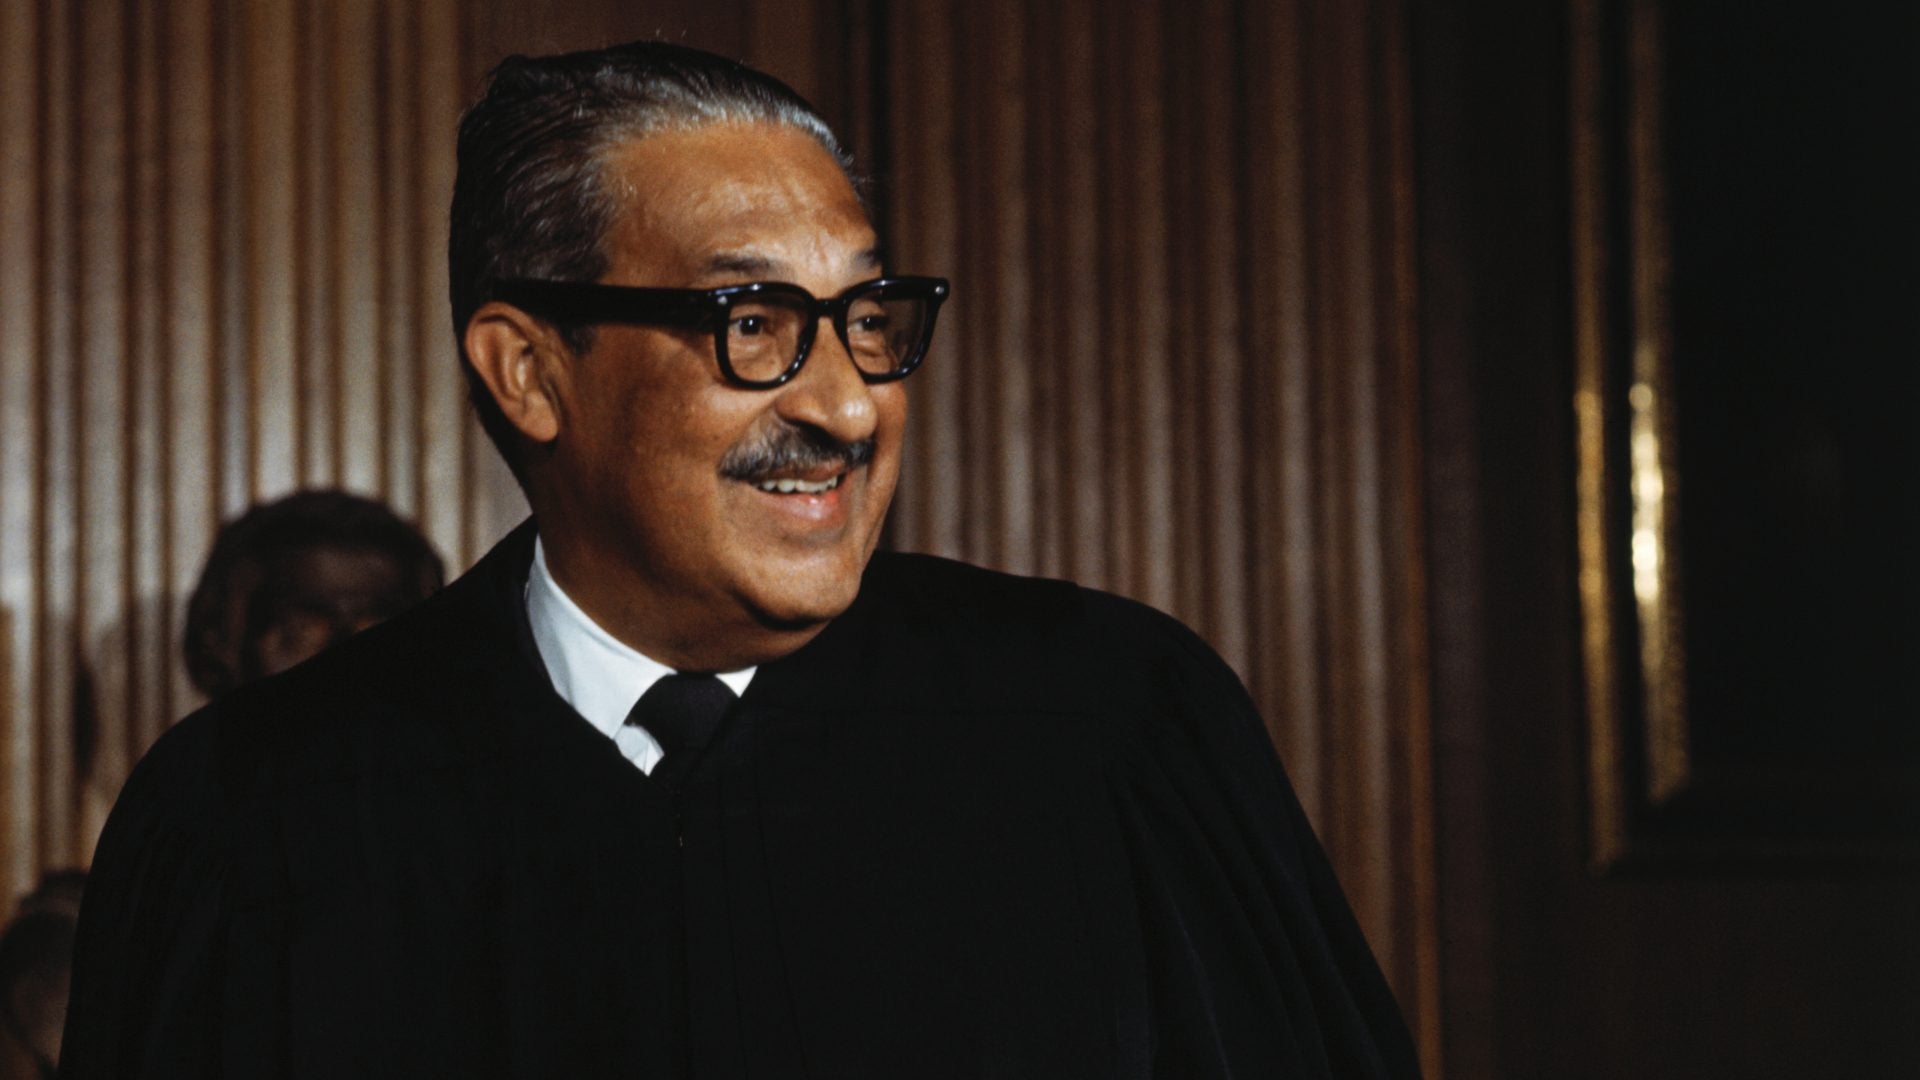 Thurgood Marshall Was Confirmed To The Supreme Court This Day. His Legacy Matters More Than Ever